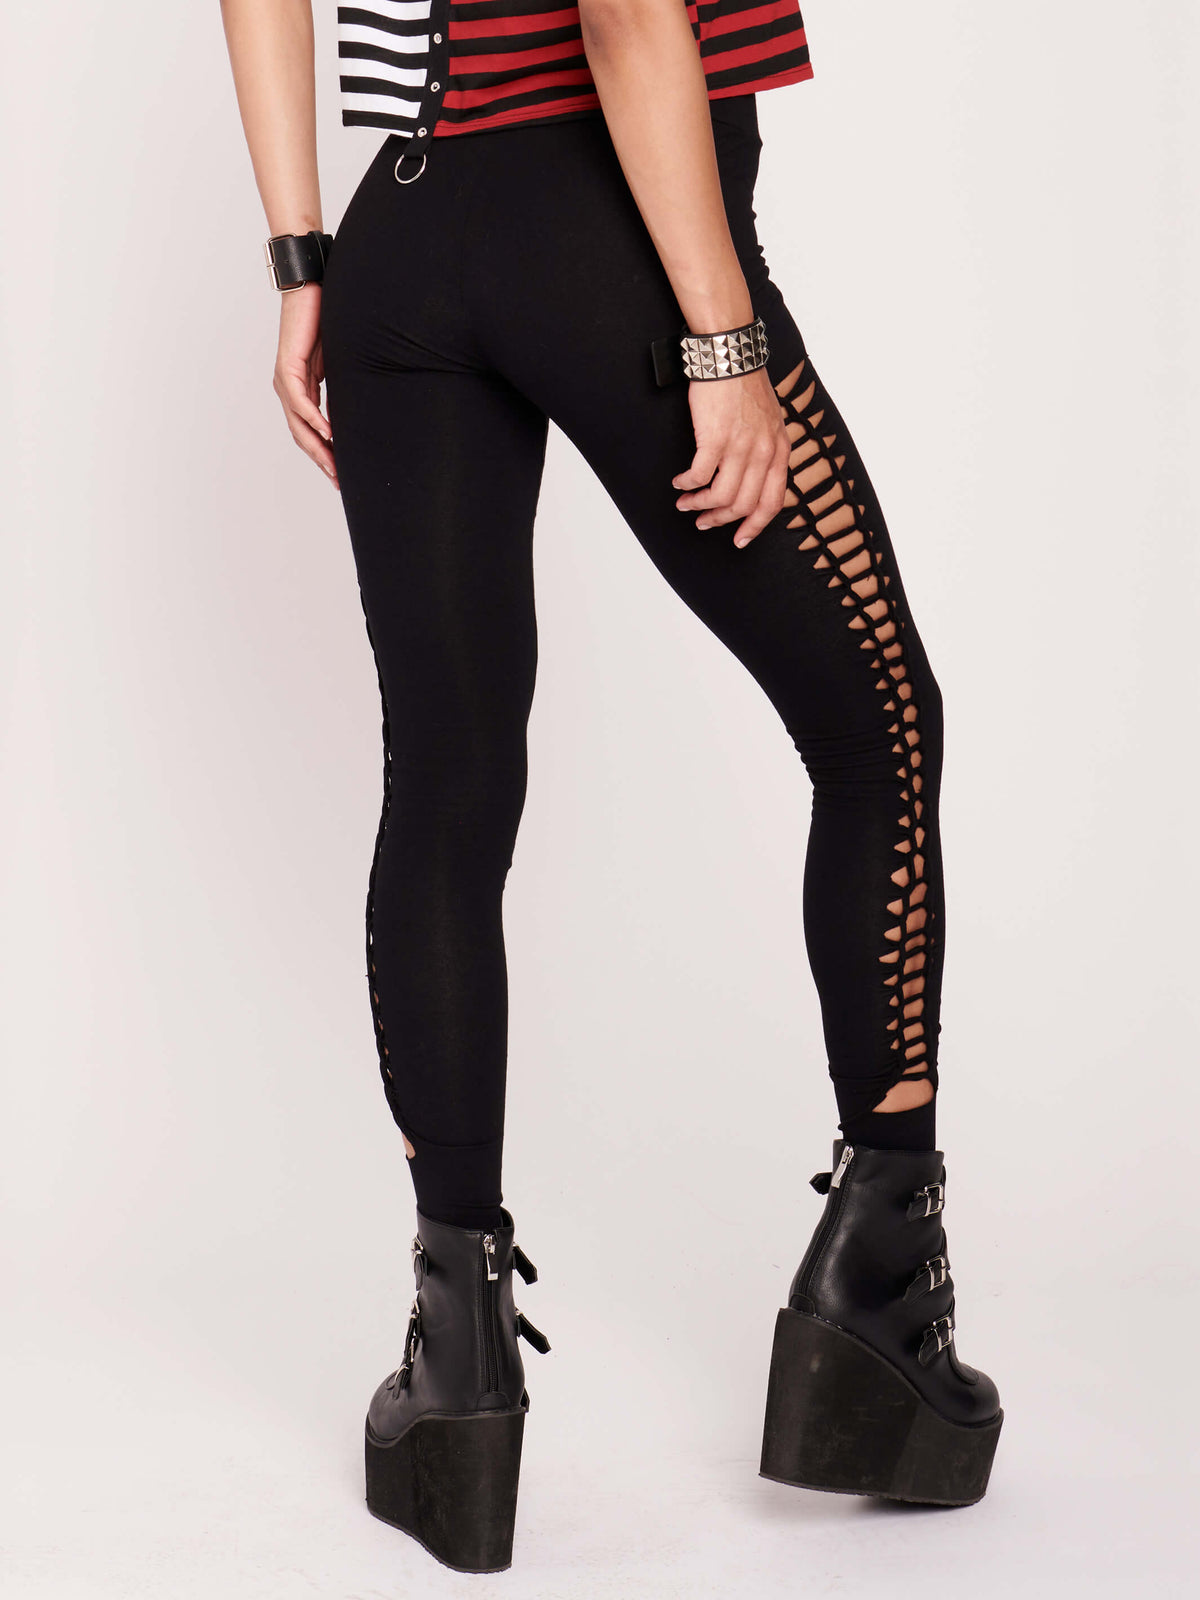 Stretchy cotton spandex leggings with slashed and braided side details. 